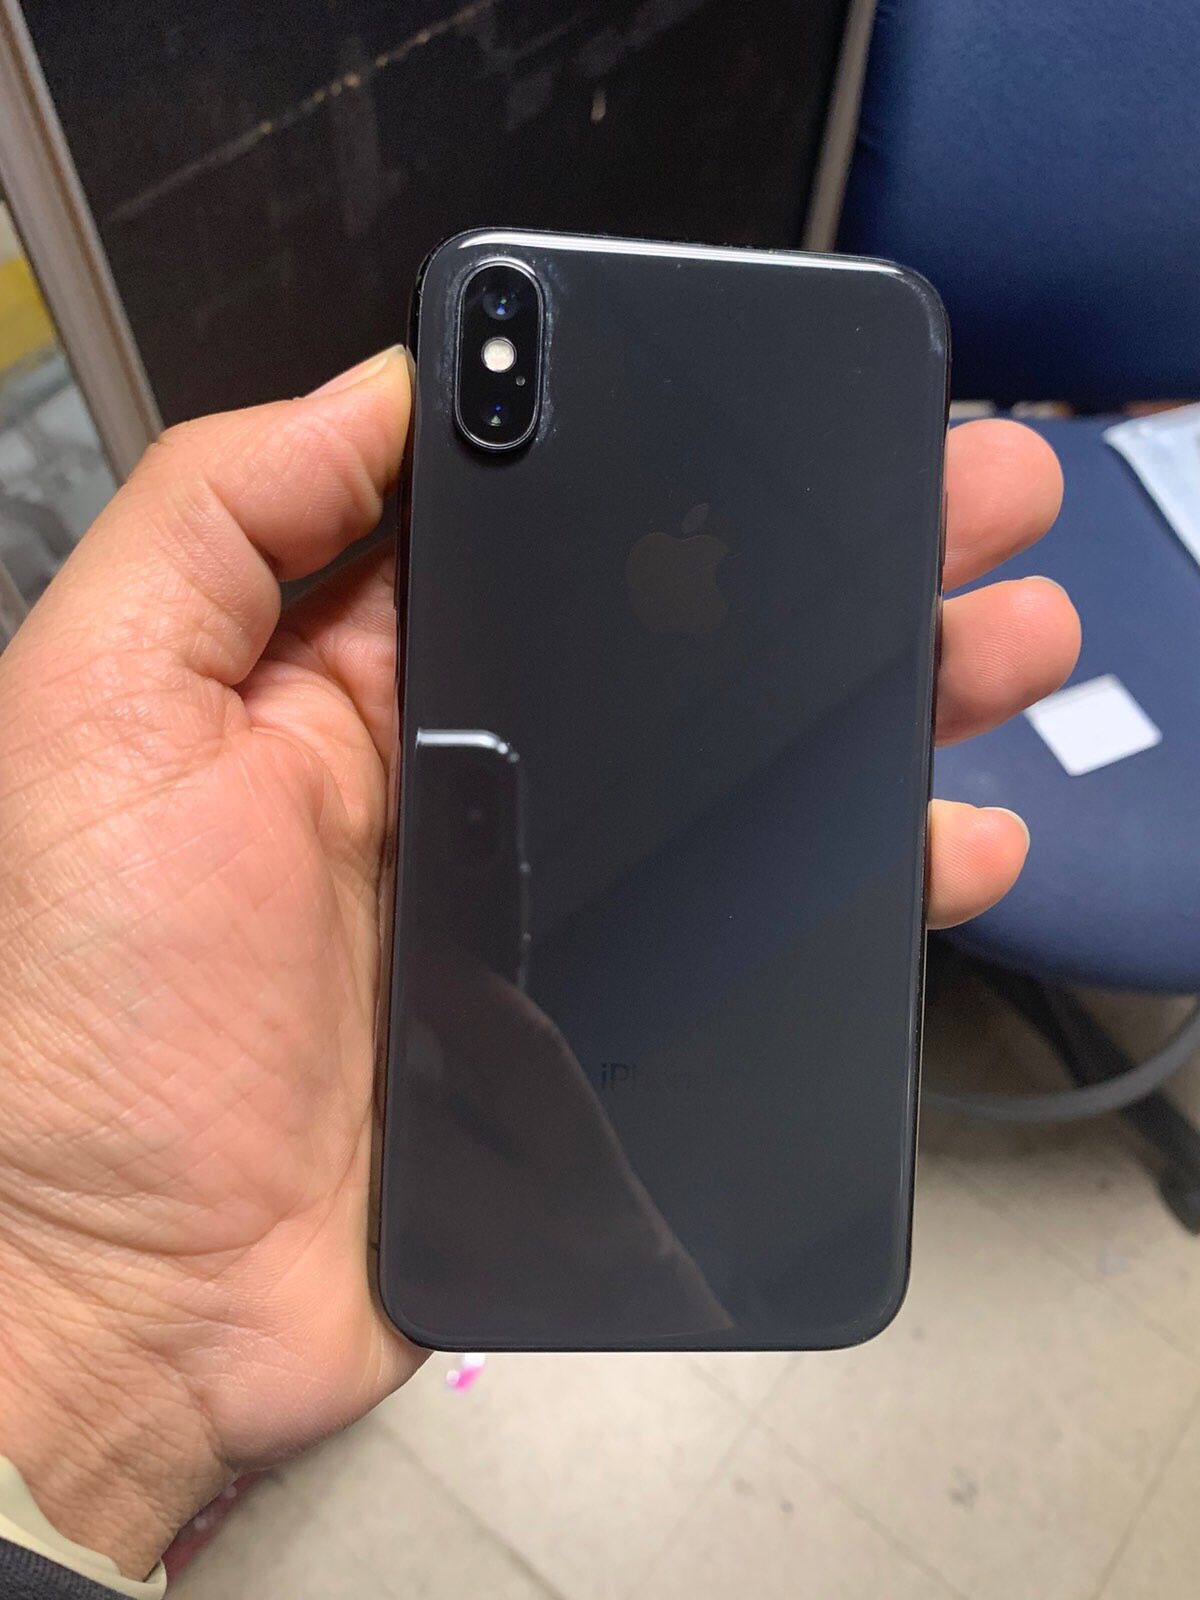 Factory Unlocked Apple iPhone X. , Sold with warranty - 64 gb